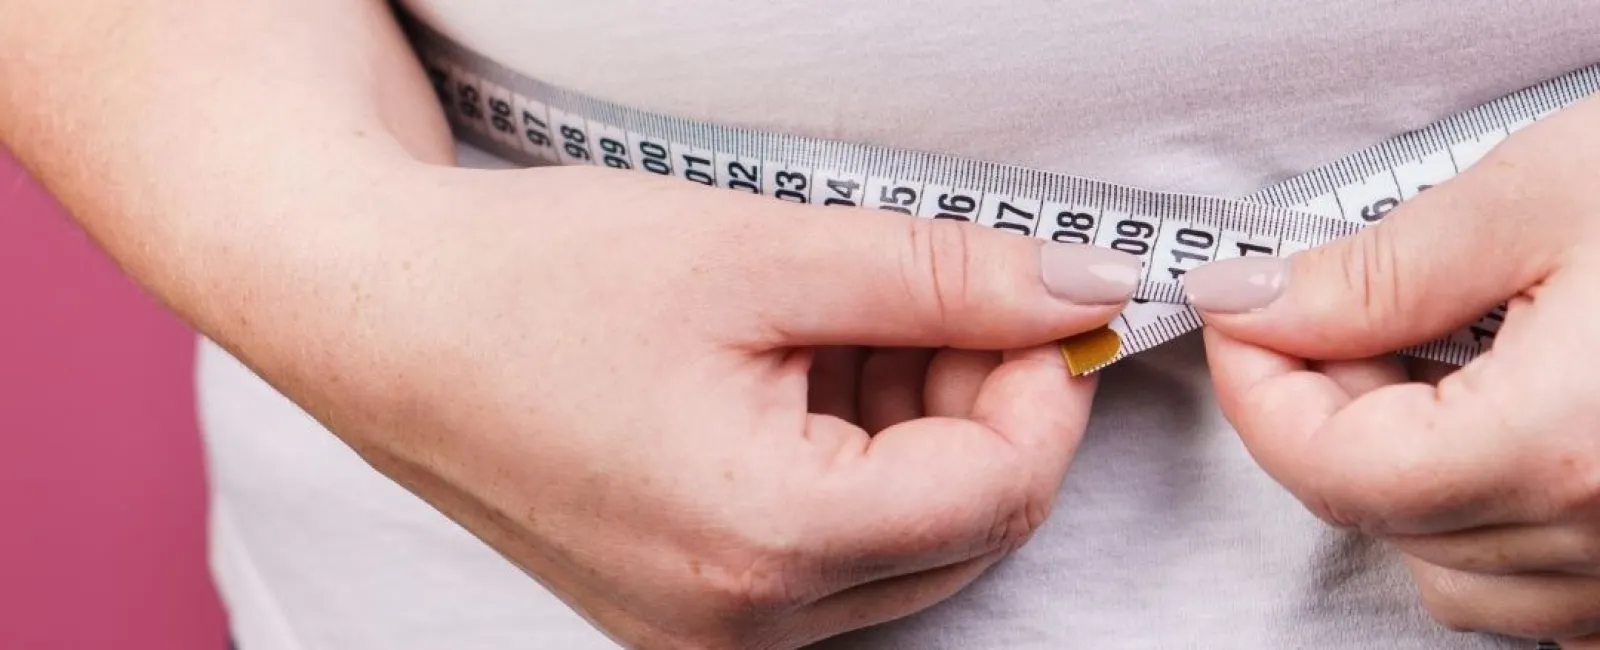 Weight Loss & Its Impact on Type 2 Diabetes, High Blood Pressure, ED & More